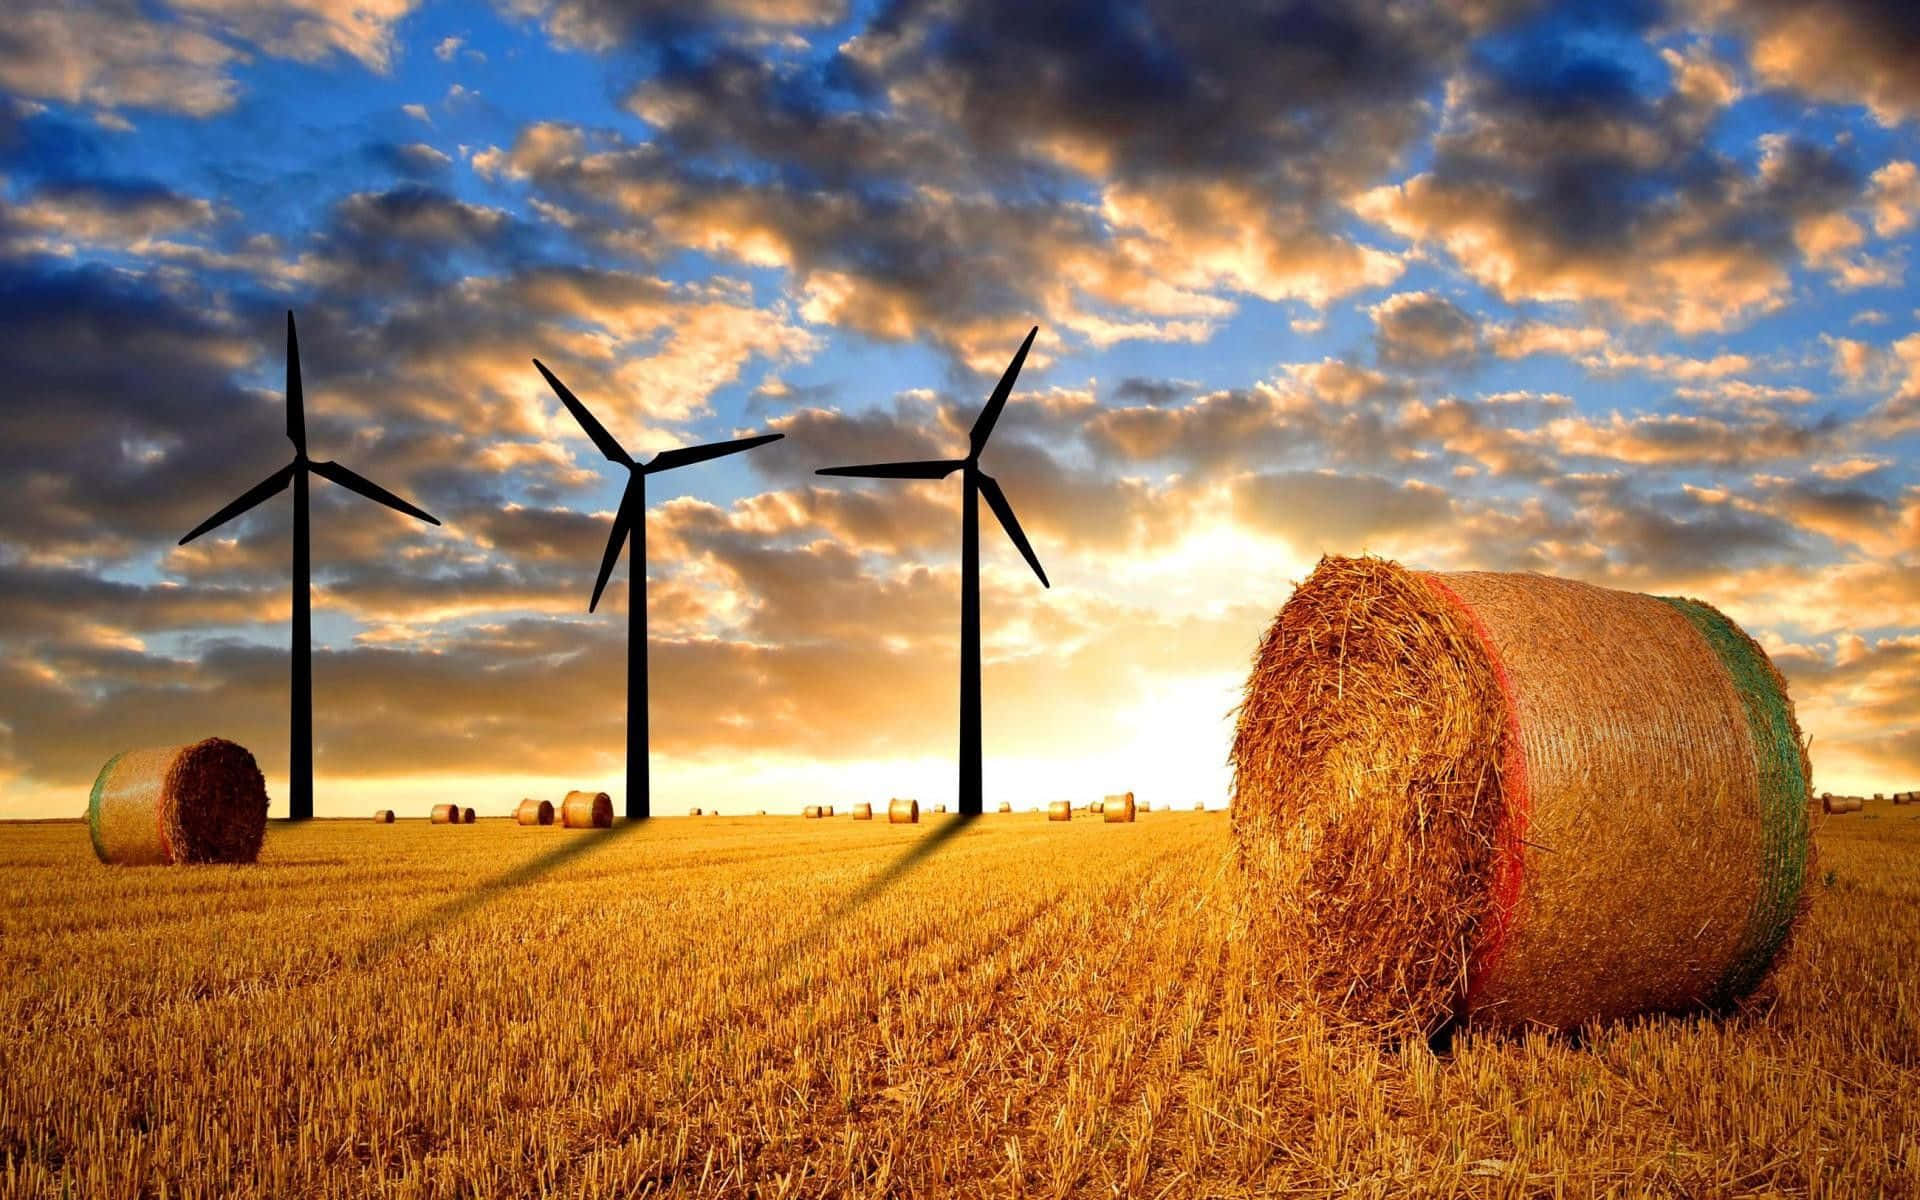 Wind Turbines In A Field With Bales Of Hay